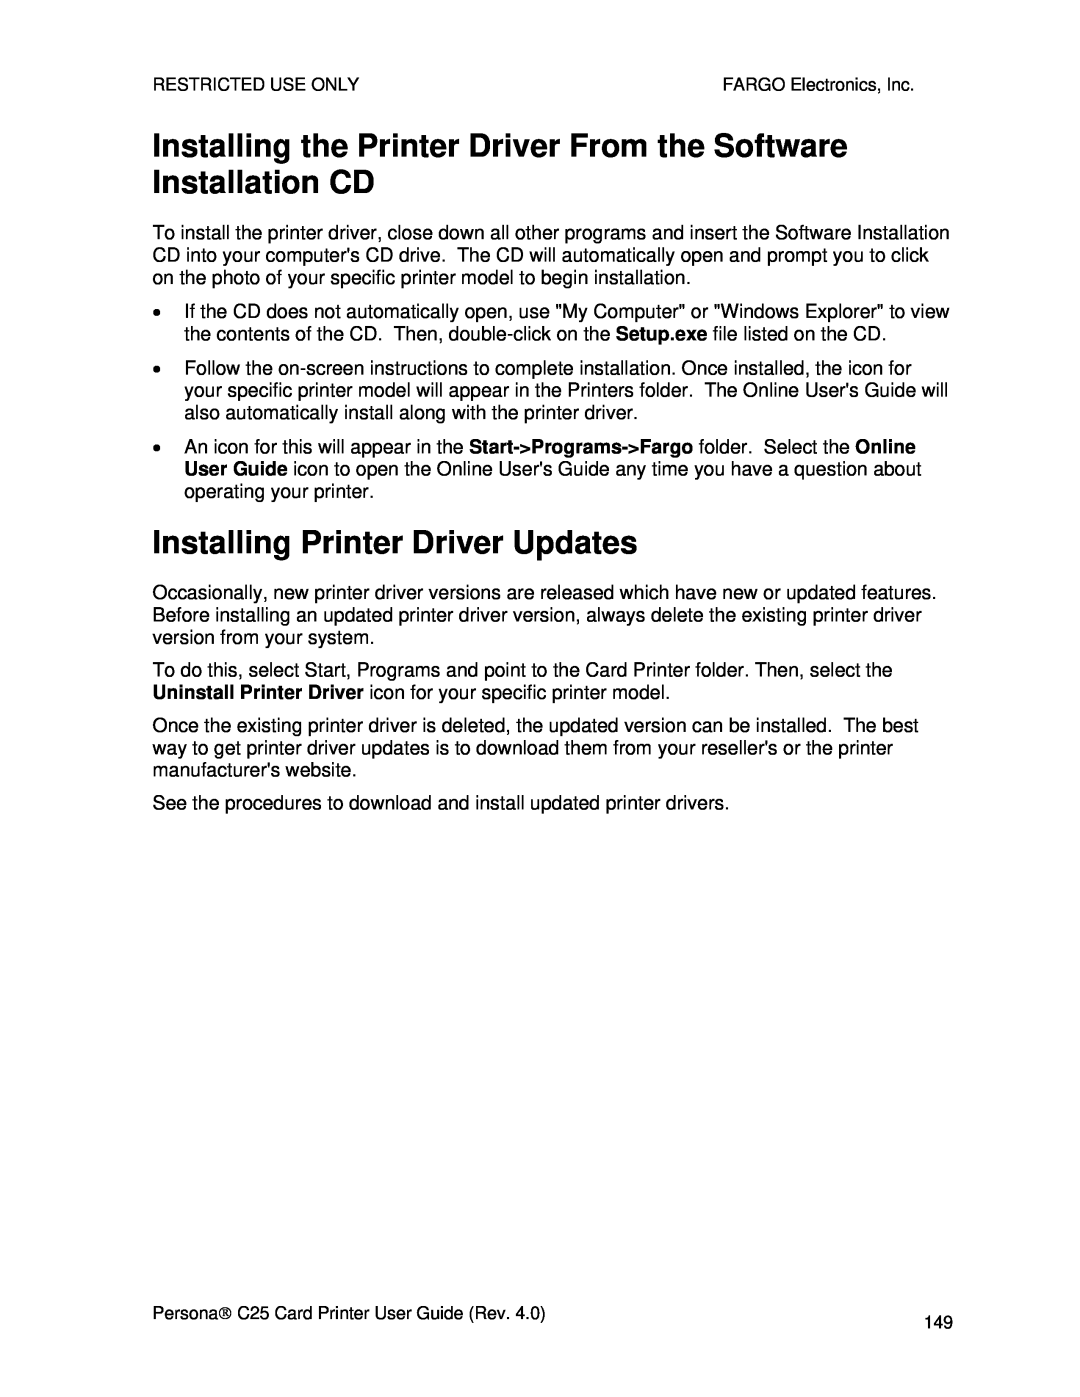 FARGO electronic S000256 manual Installing the Printer Driver From the Software Installation CD 